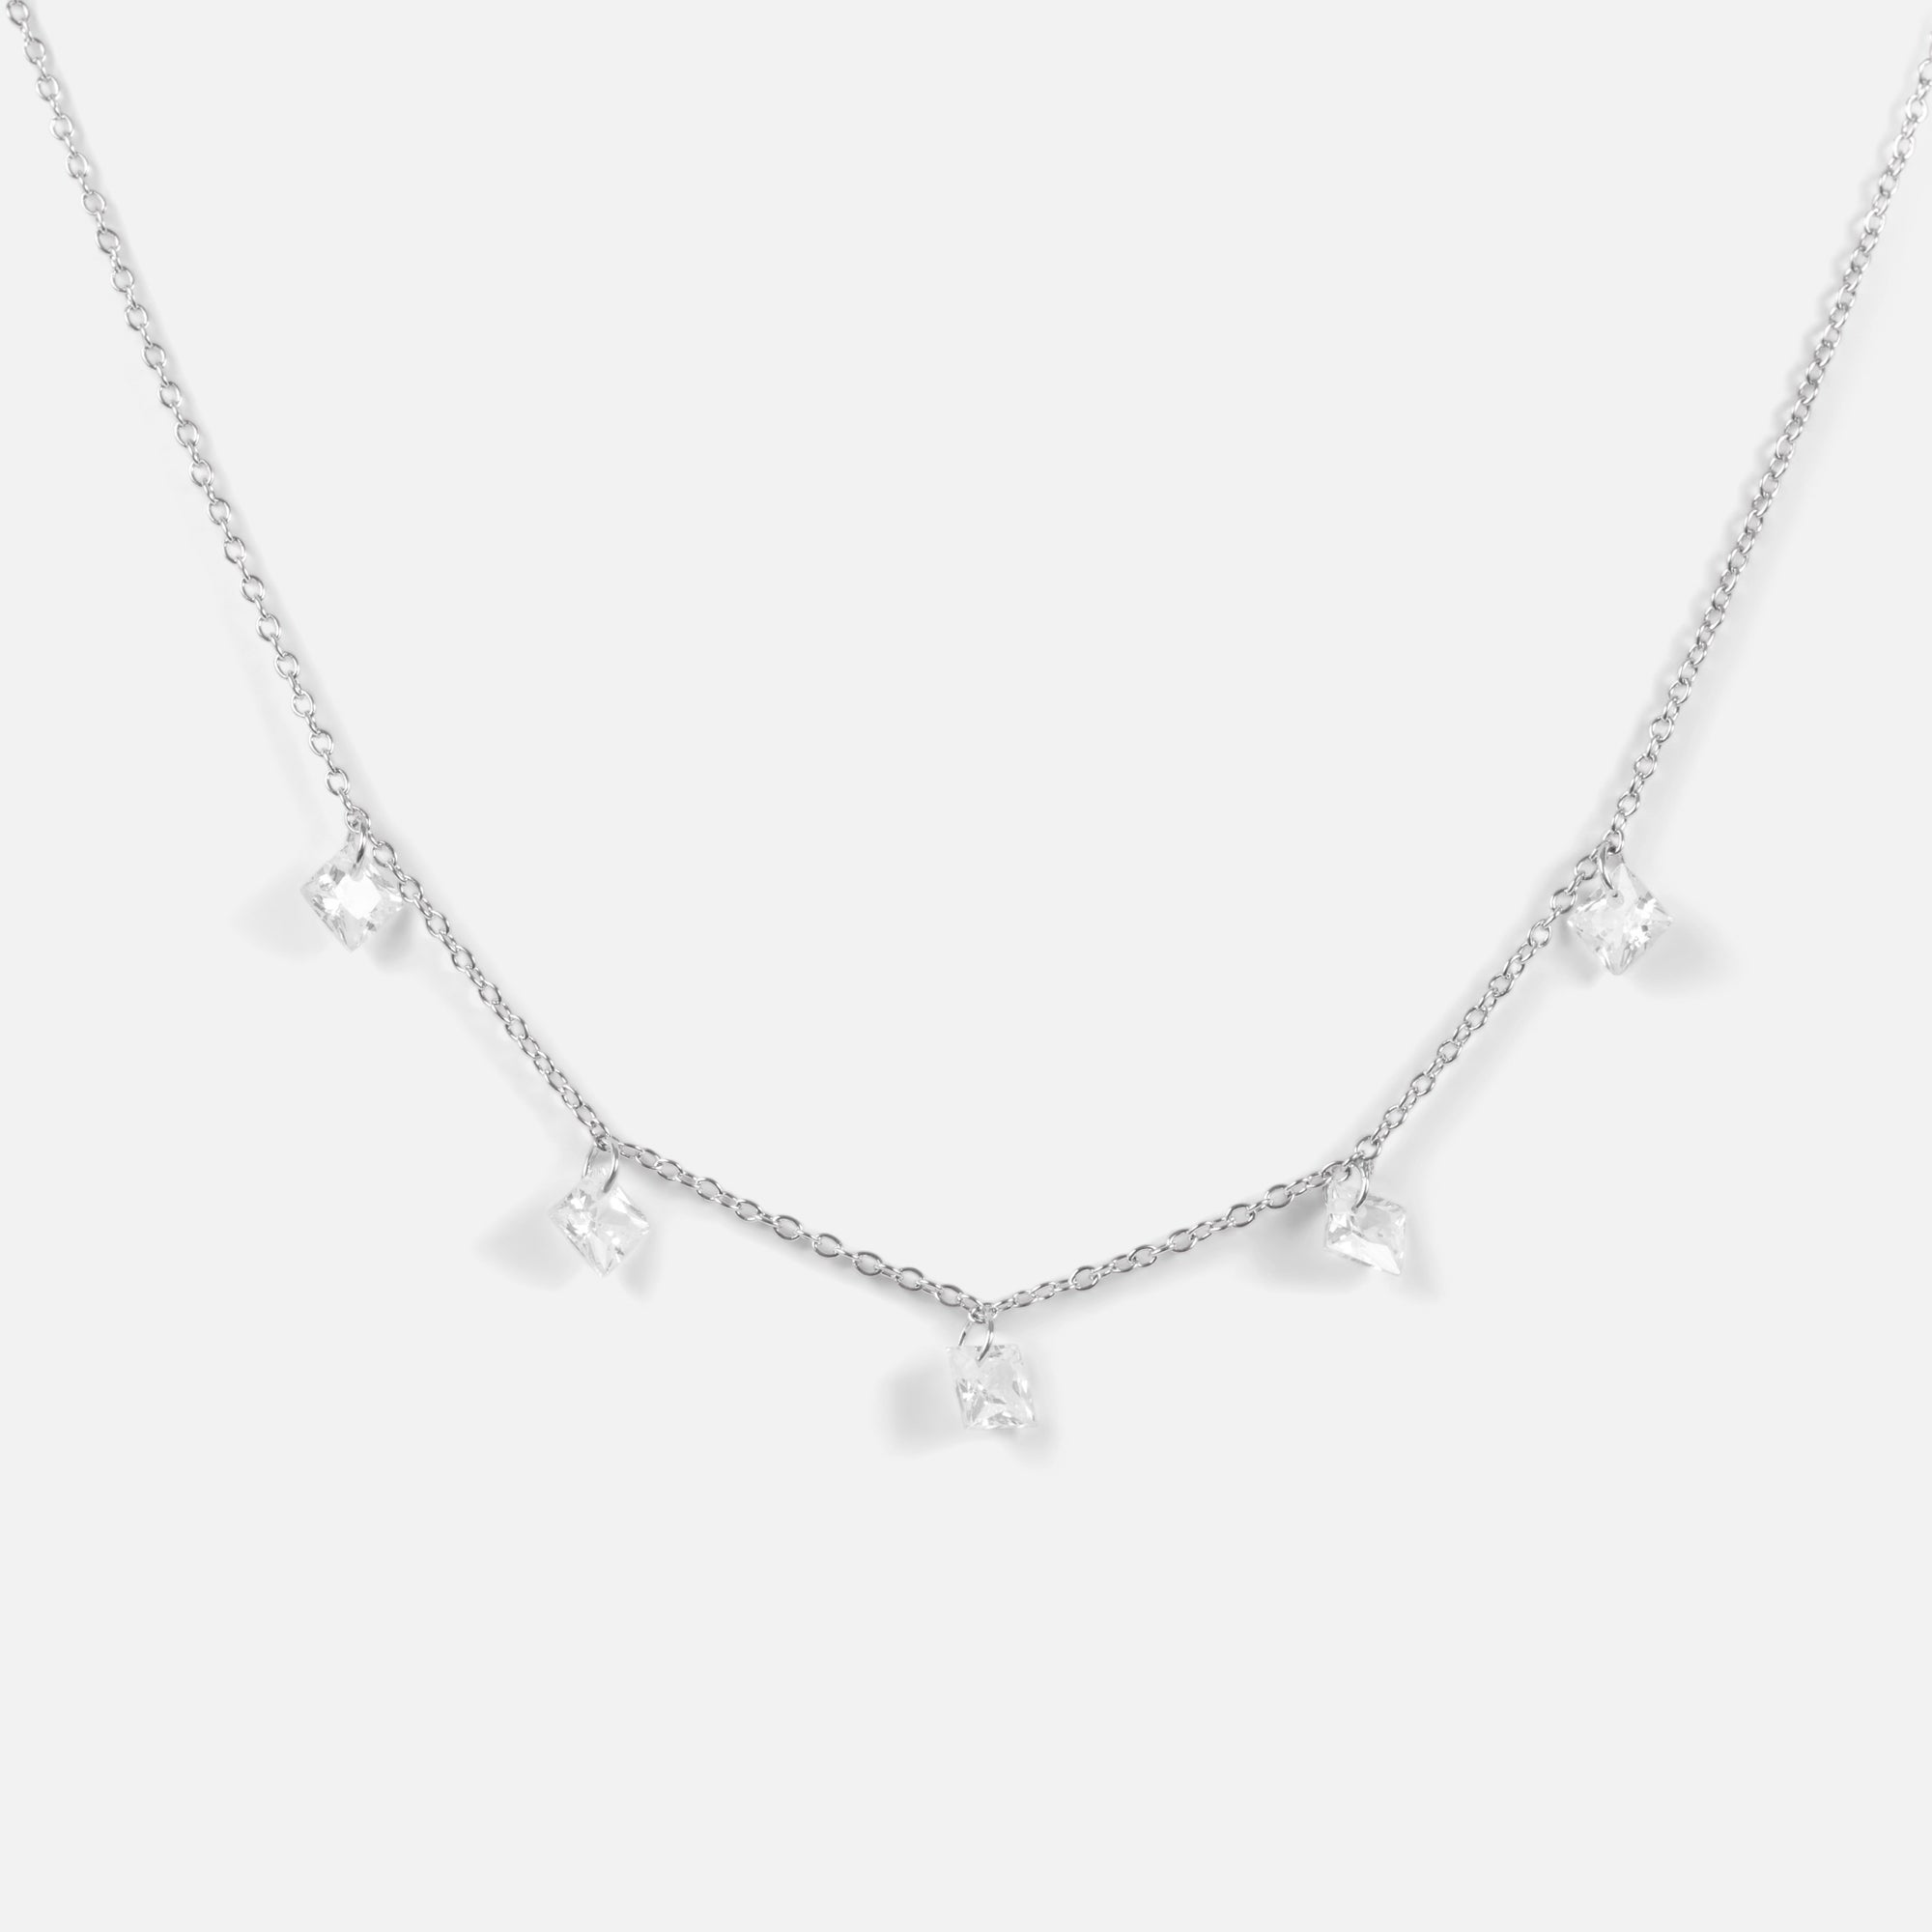 Silvered chain decorated with five cubic zirconia stones